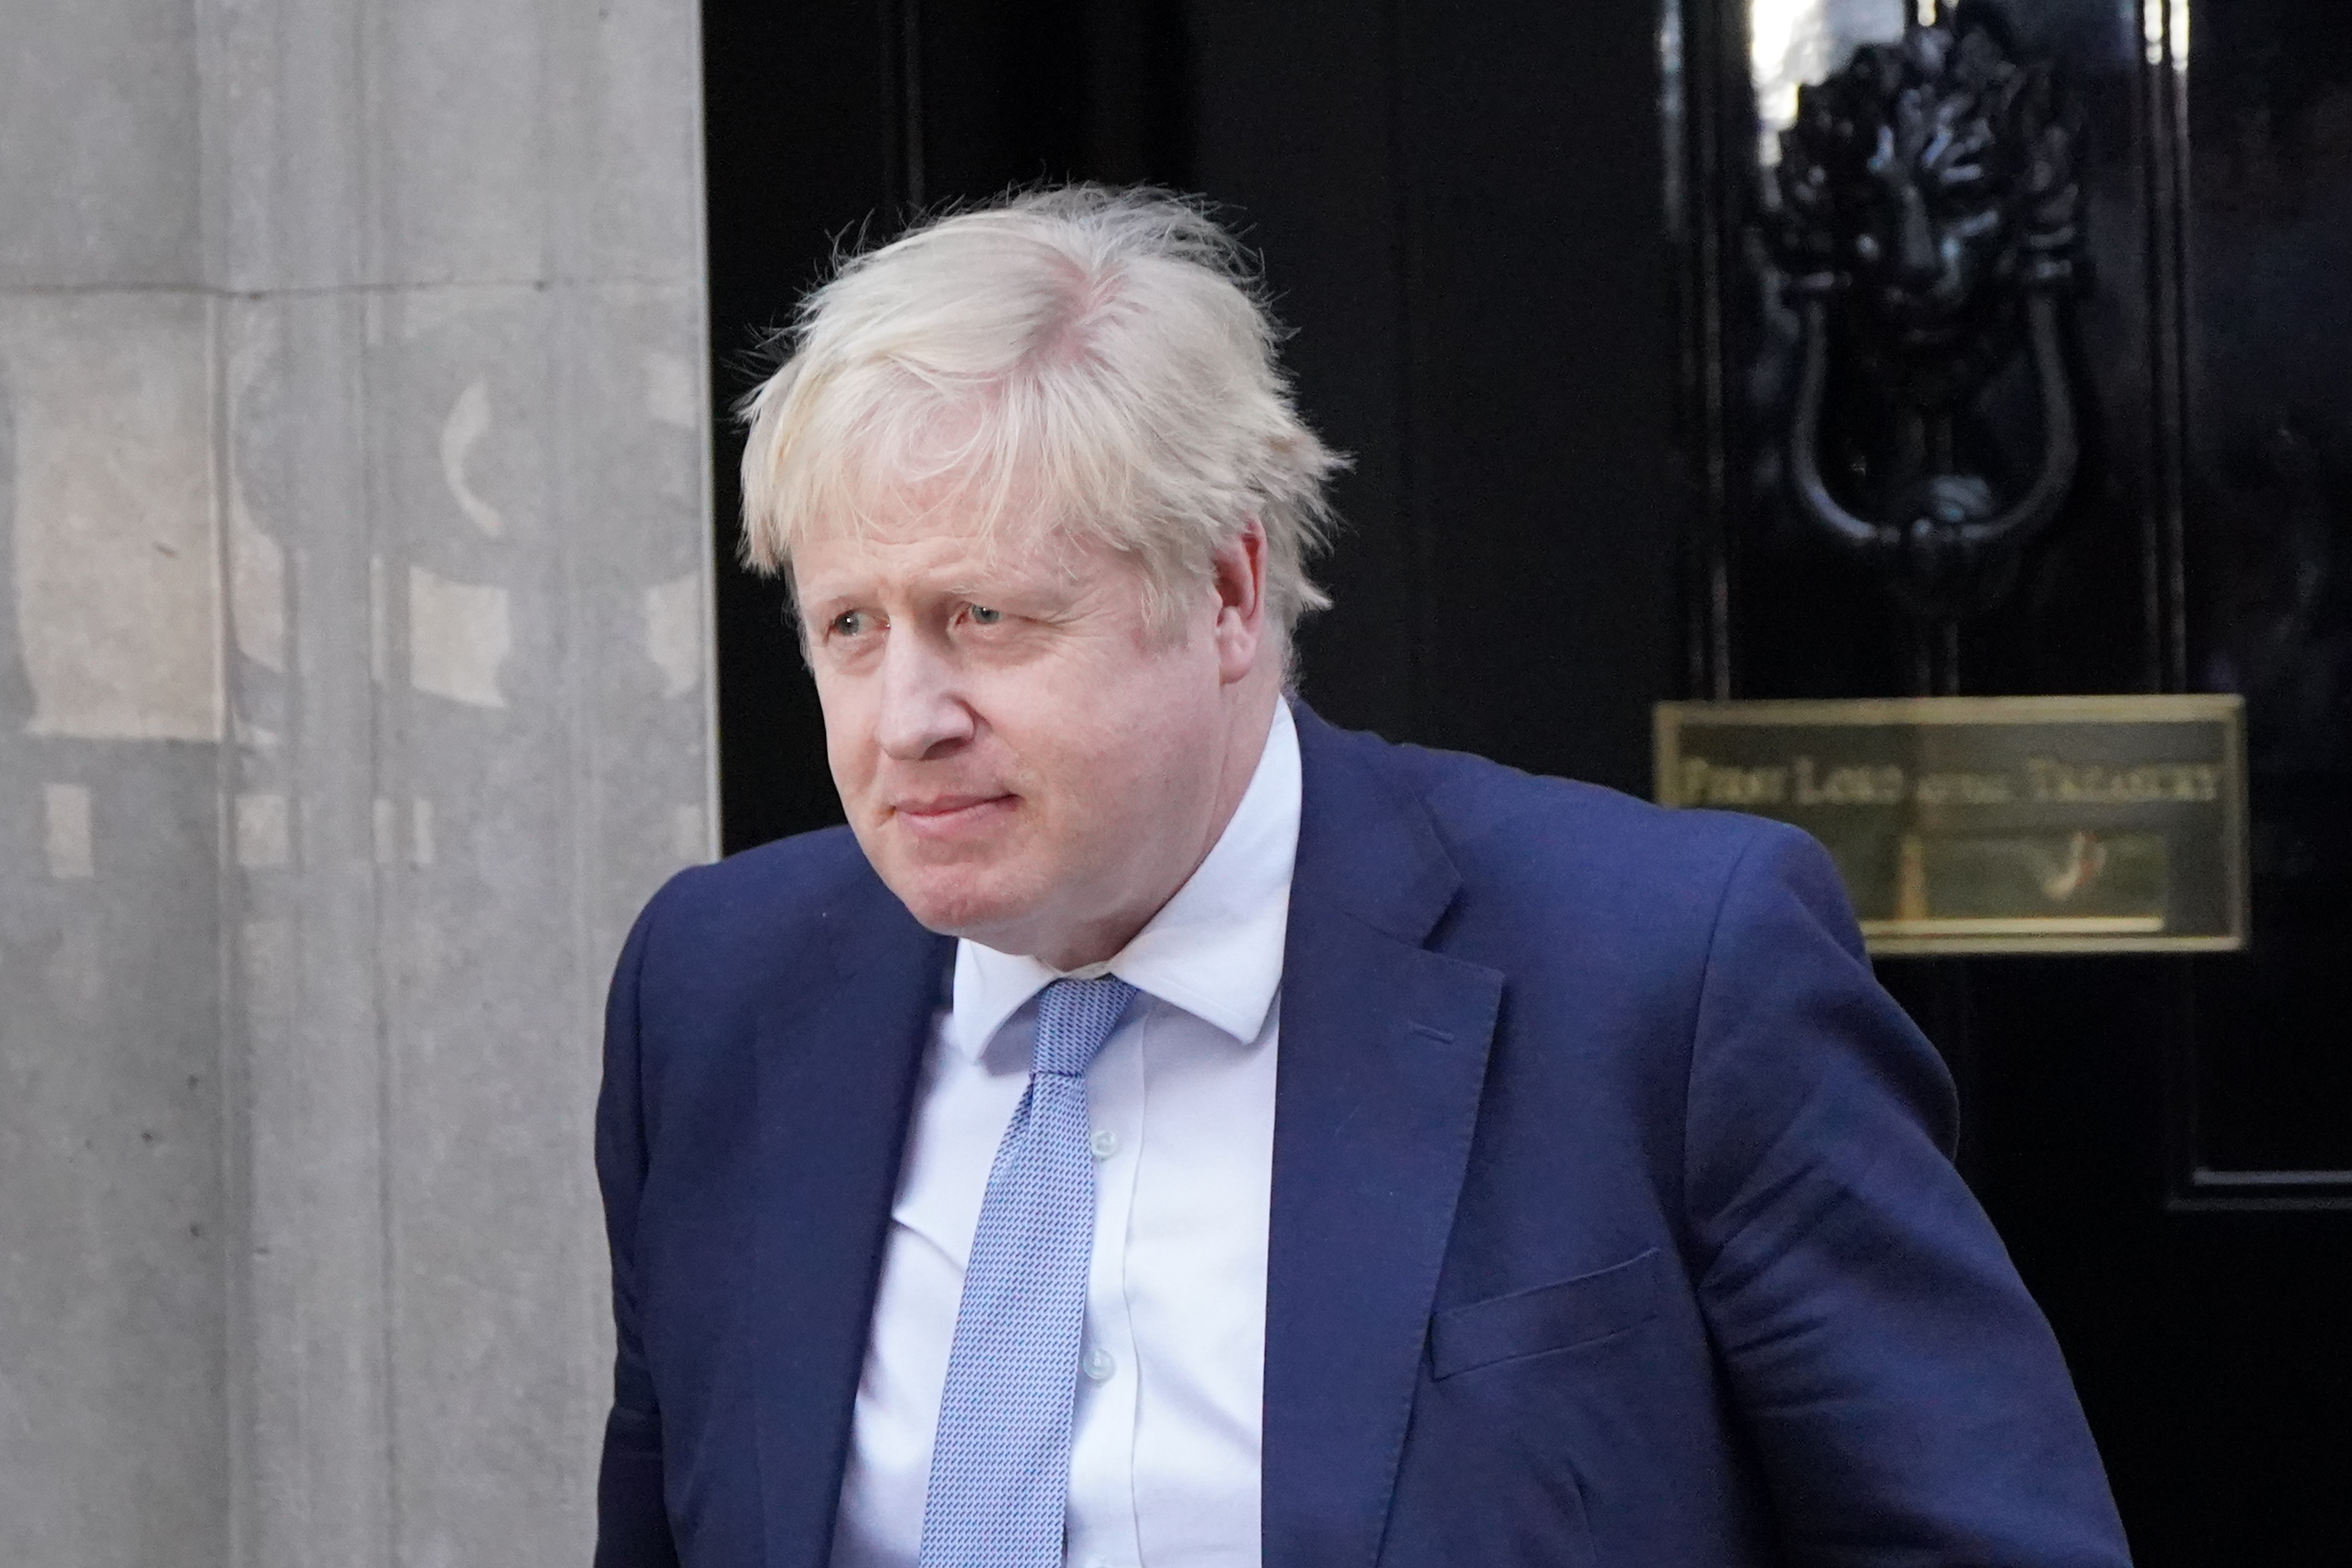 Prime Minister Boris Johnson leaves 10 Downing Street, Westminster, for the House of Commons, where he will make a statement to MPs on the Sue Gray report after she provided an update on her investigations earlier today, January 31.